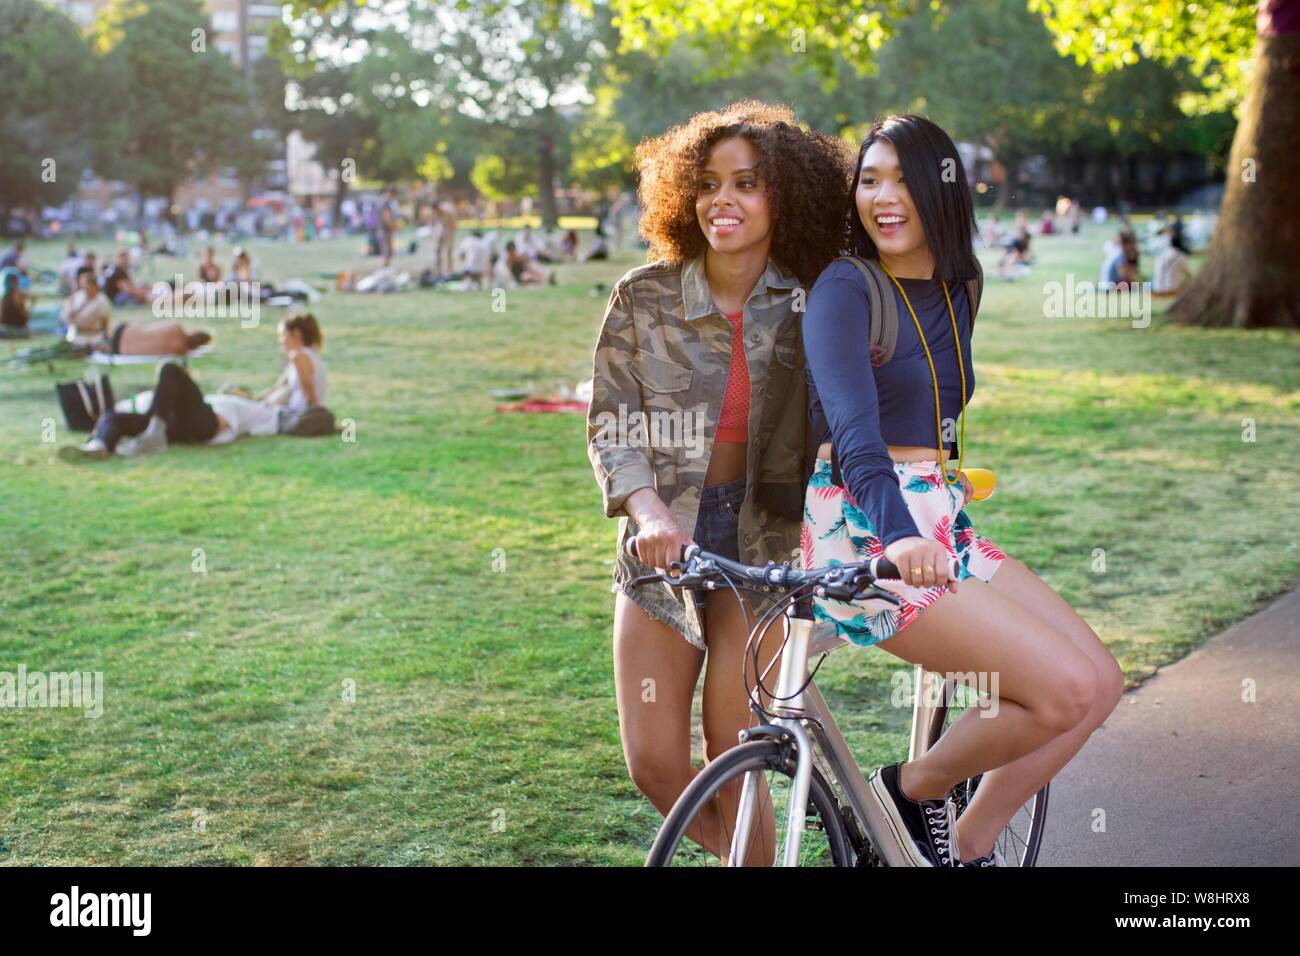 Two young women in park, one sitting on bicycle. Stock Photo